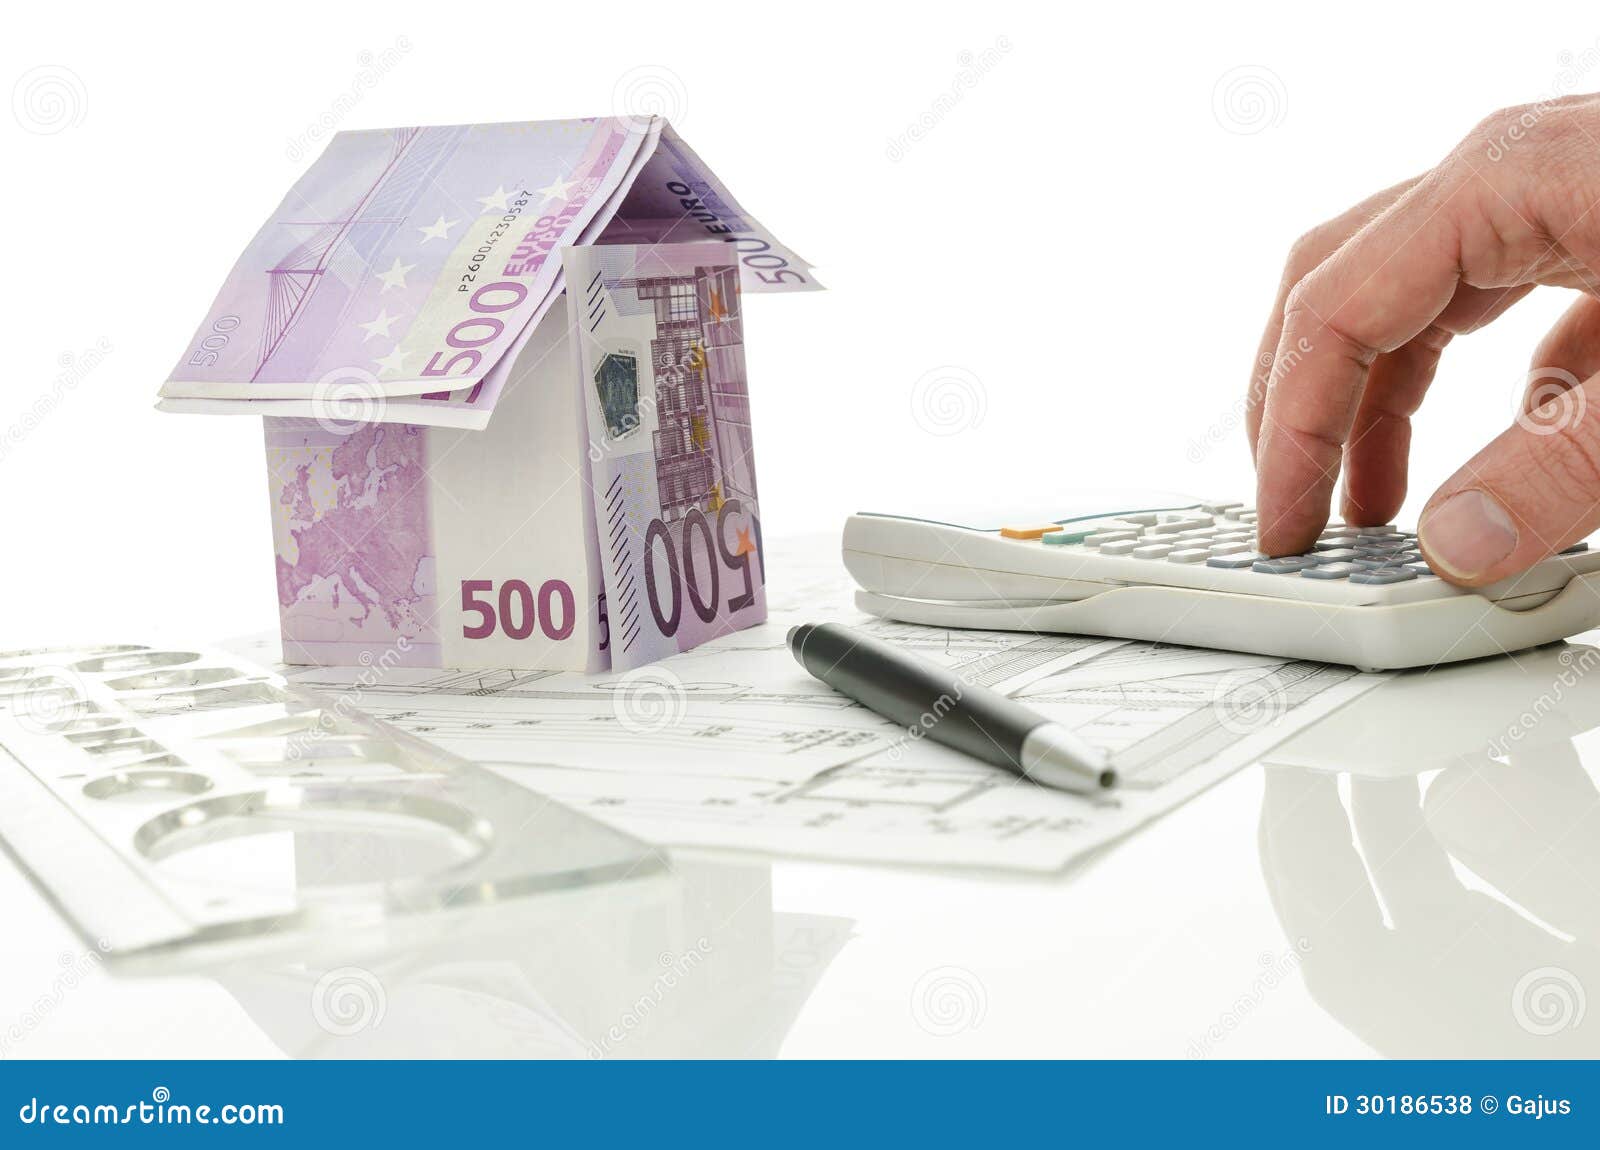 architect calculating costs house construction blueprints house made money his desk over white background 30186538